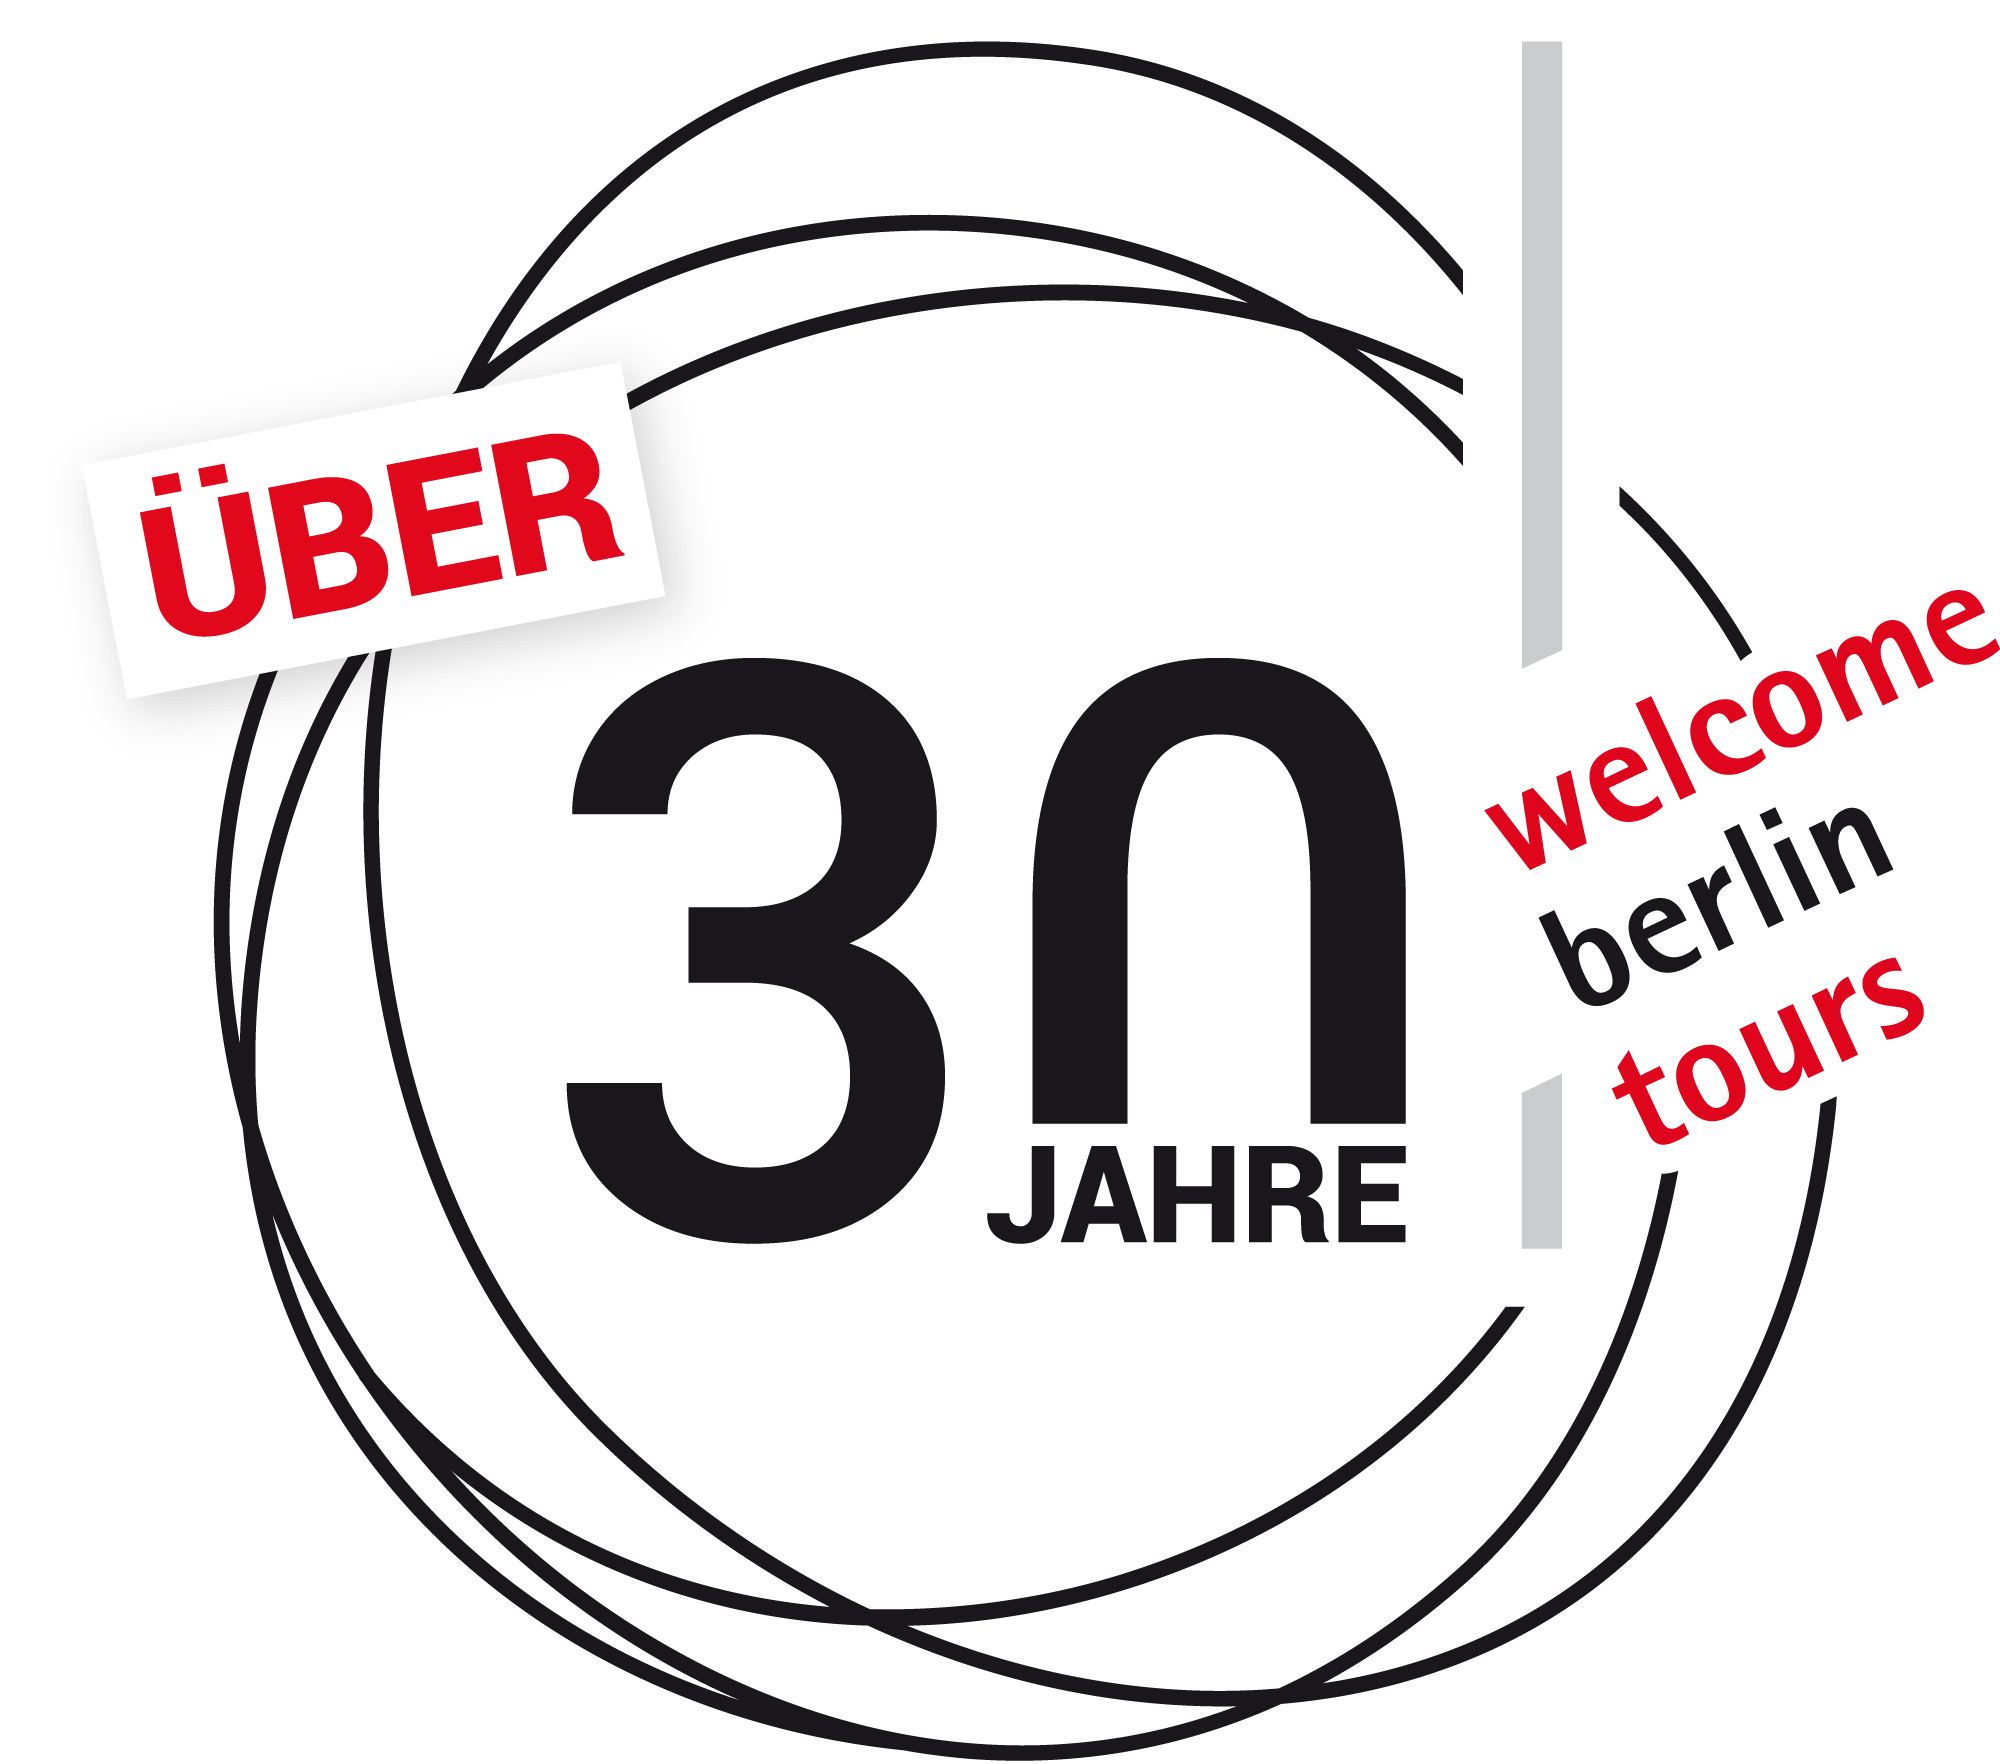 welcome berlin tours GmbH